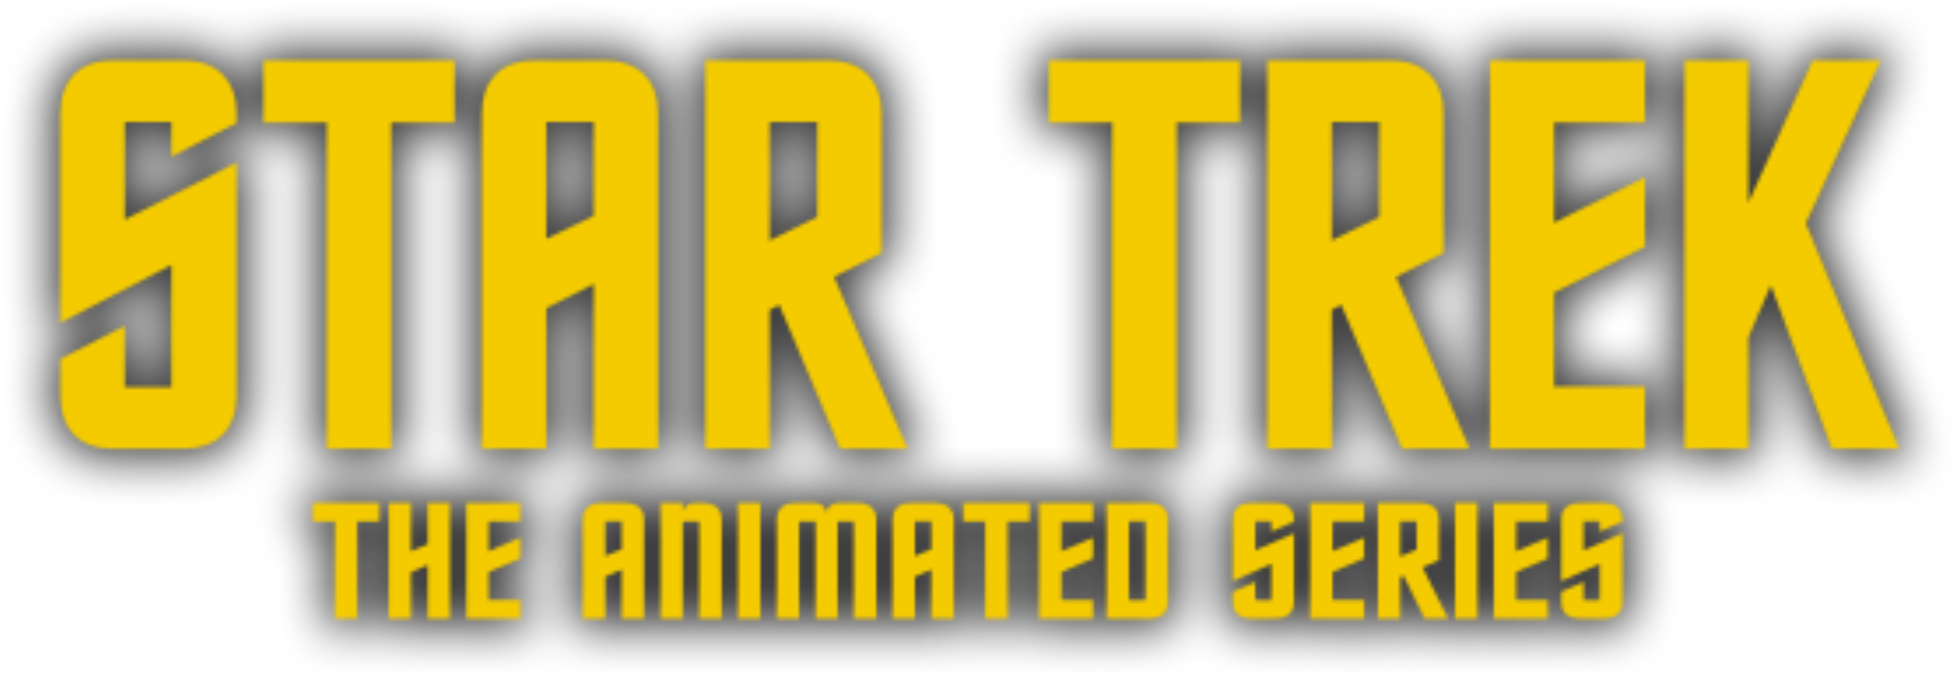 Download The Animated Series - Star Trek The Animated Series Logo PNG Image  with No Background 